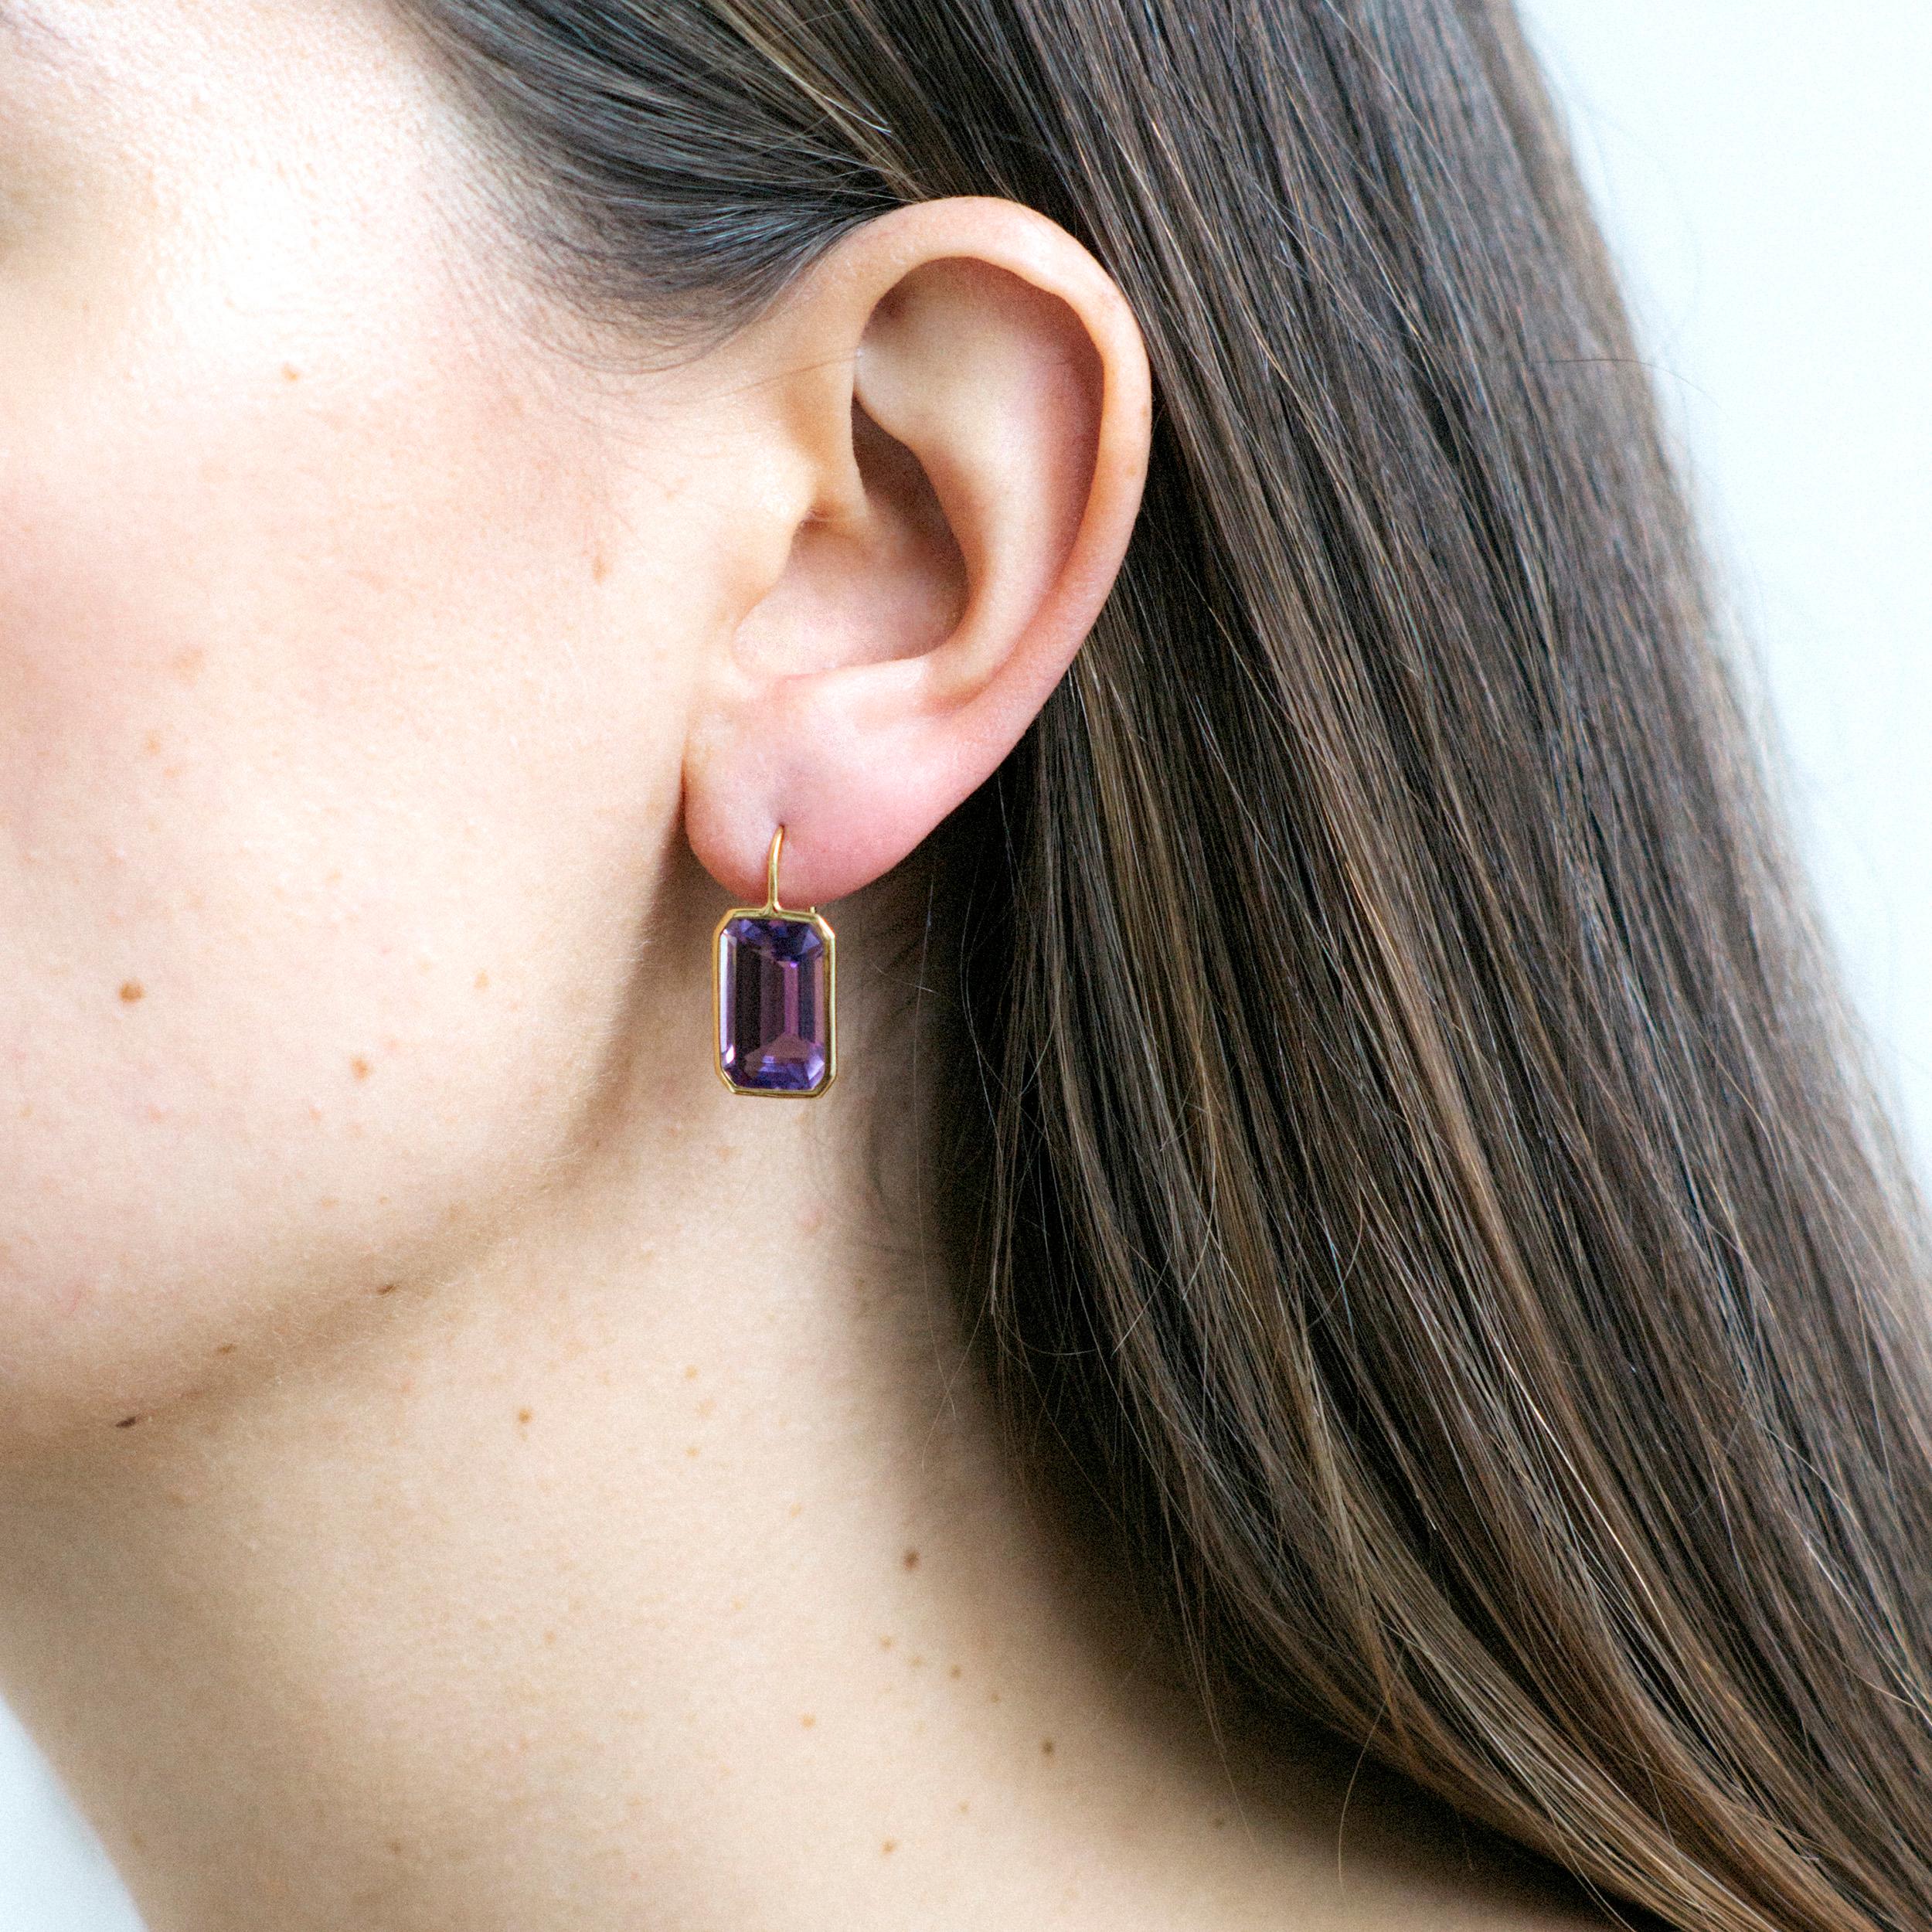 Amethyst Emerald Cut Earrings on Wire in 18K Yellow Gold from 'Gossip' Collection

Stone Size: 15 x 10 mm